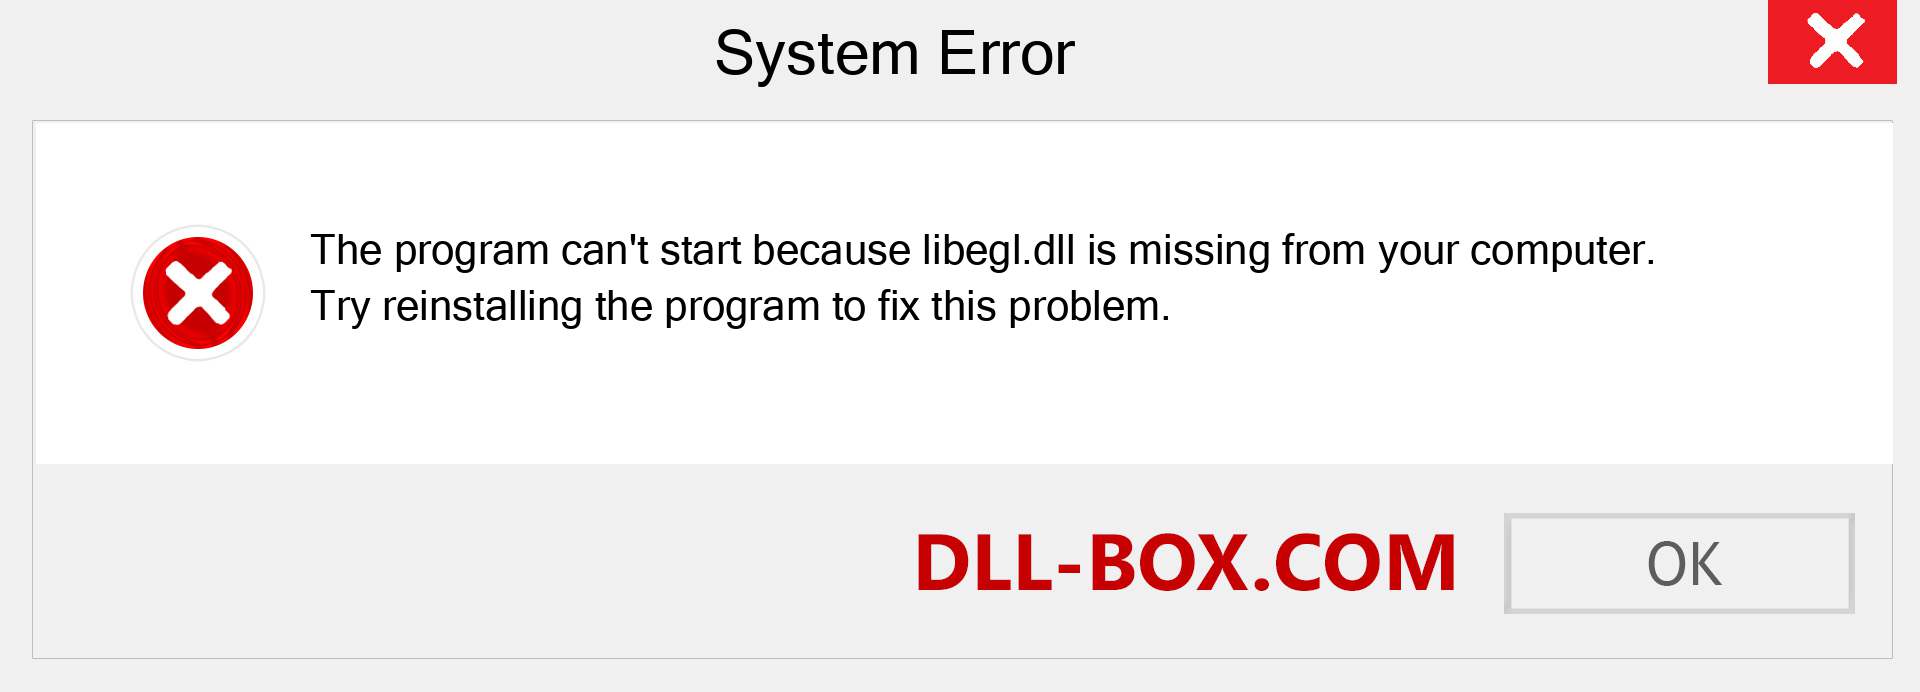  libegl.dll file is missing?. Download for Windows 7, 8, 10 - Fix  libegl dll Missing Error on Windows, photos, images